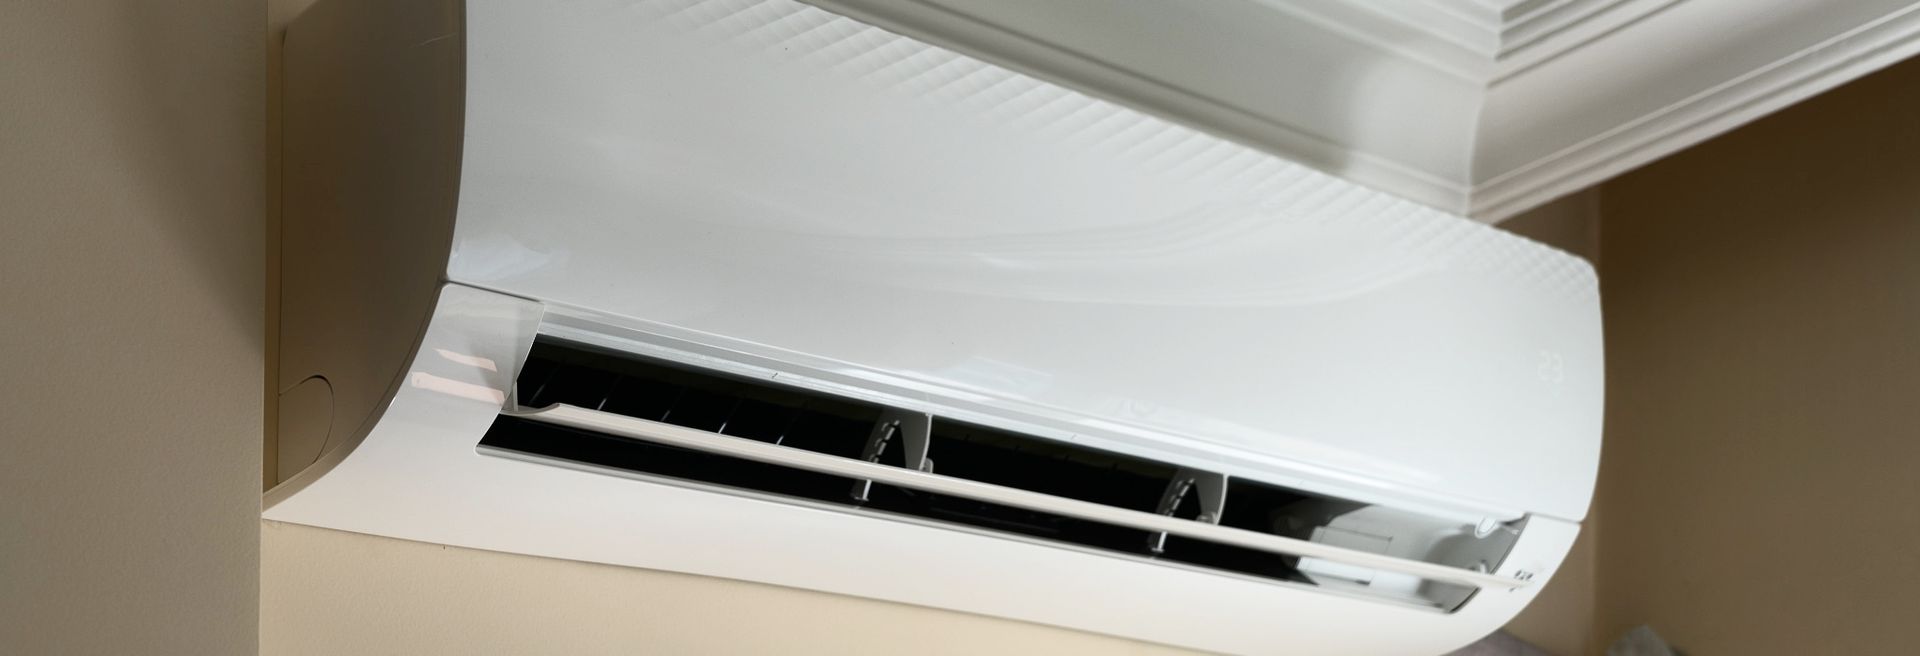 a white air conditioner is hanging from the ceiling in a room .